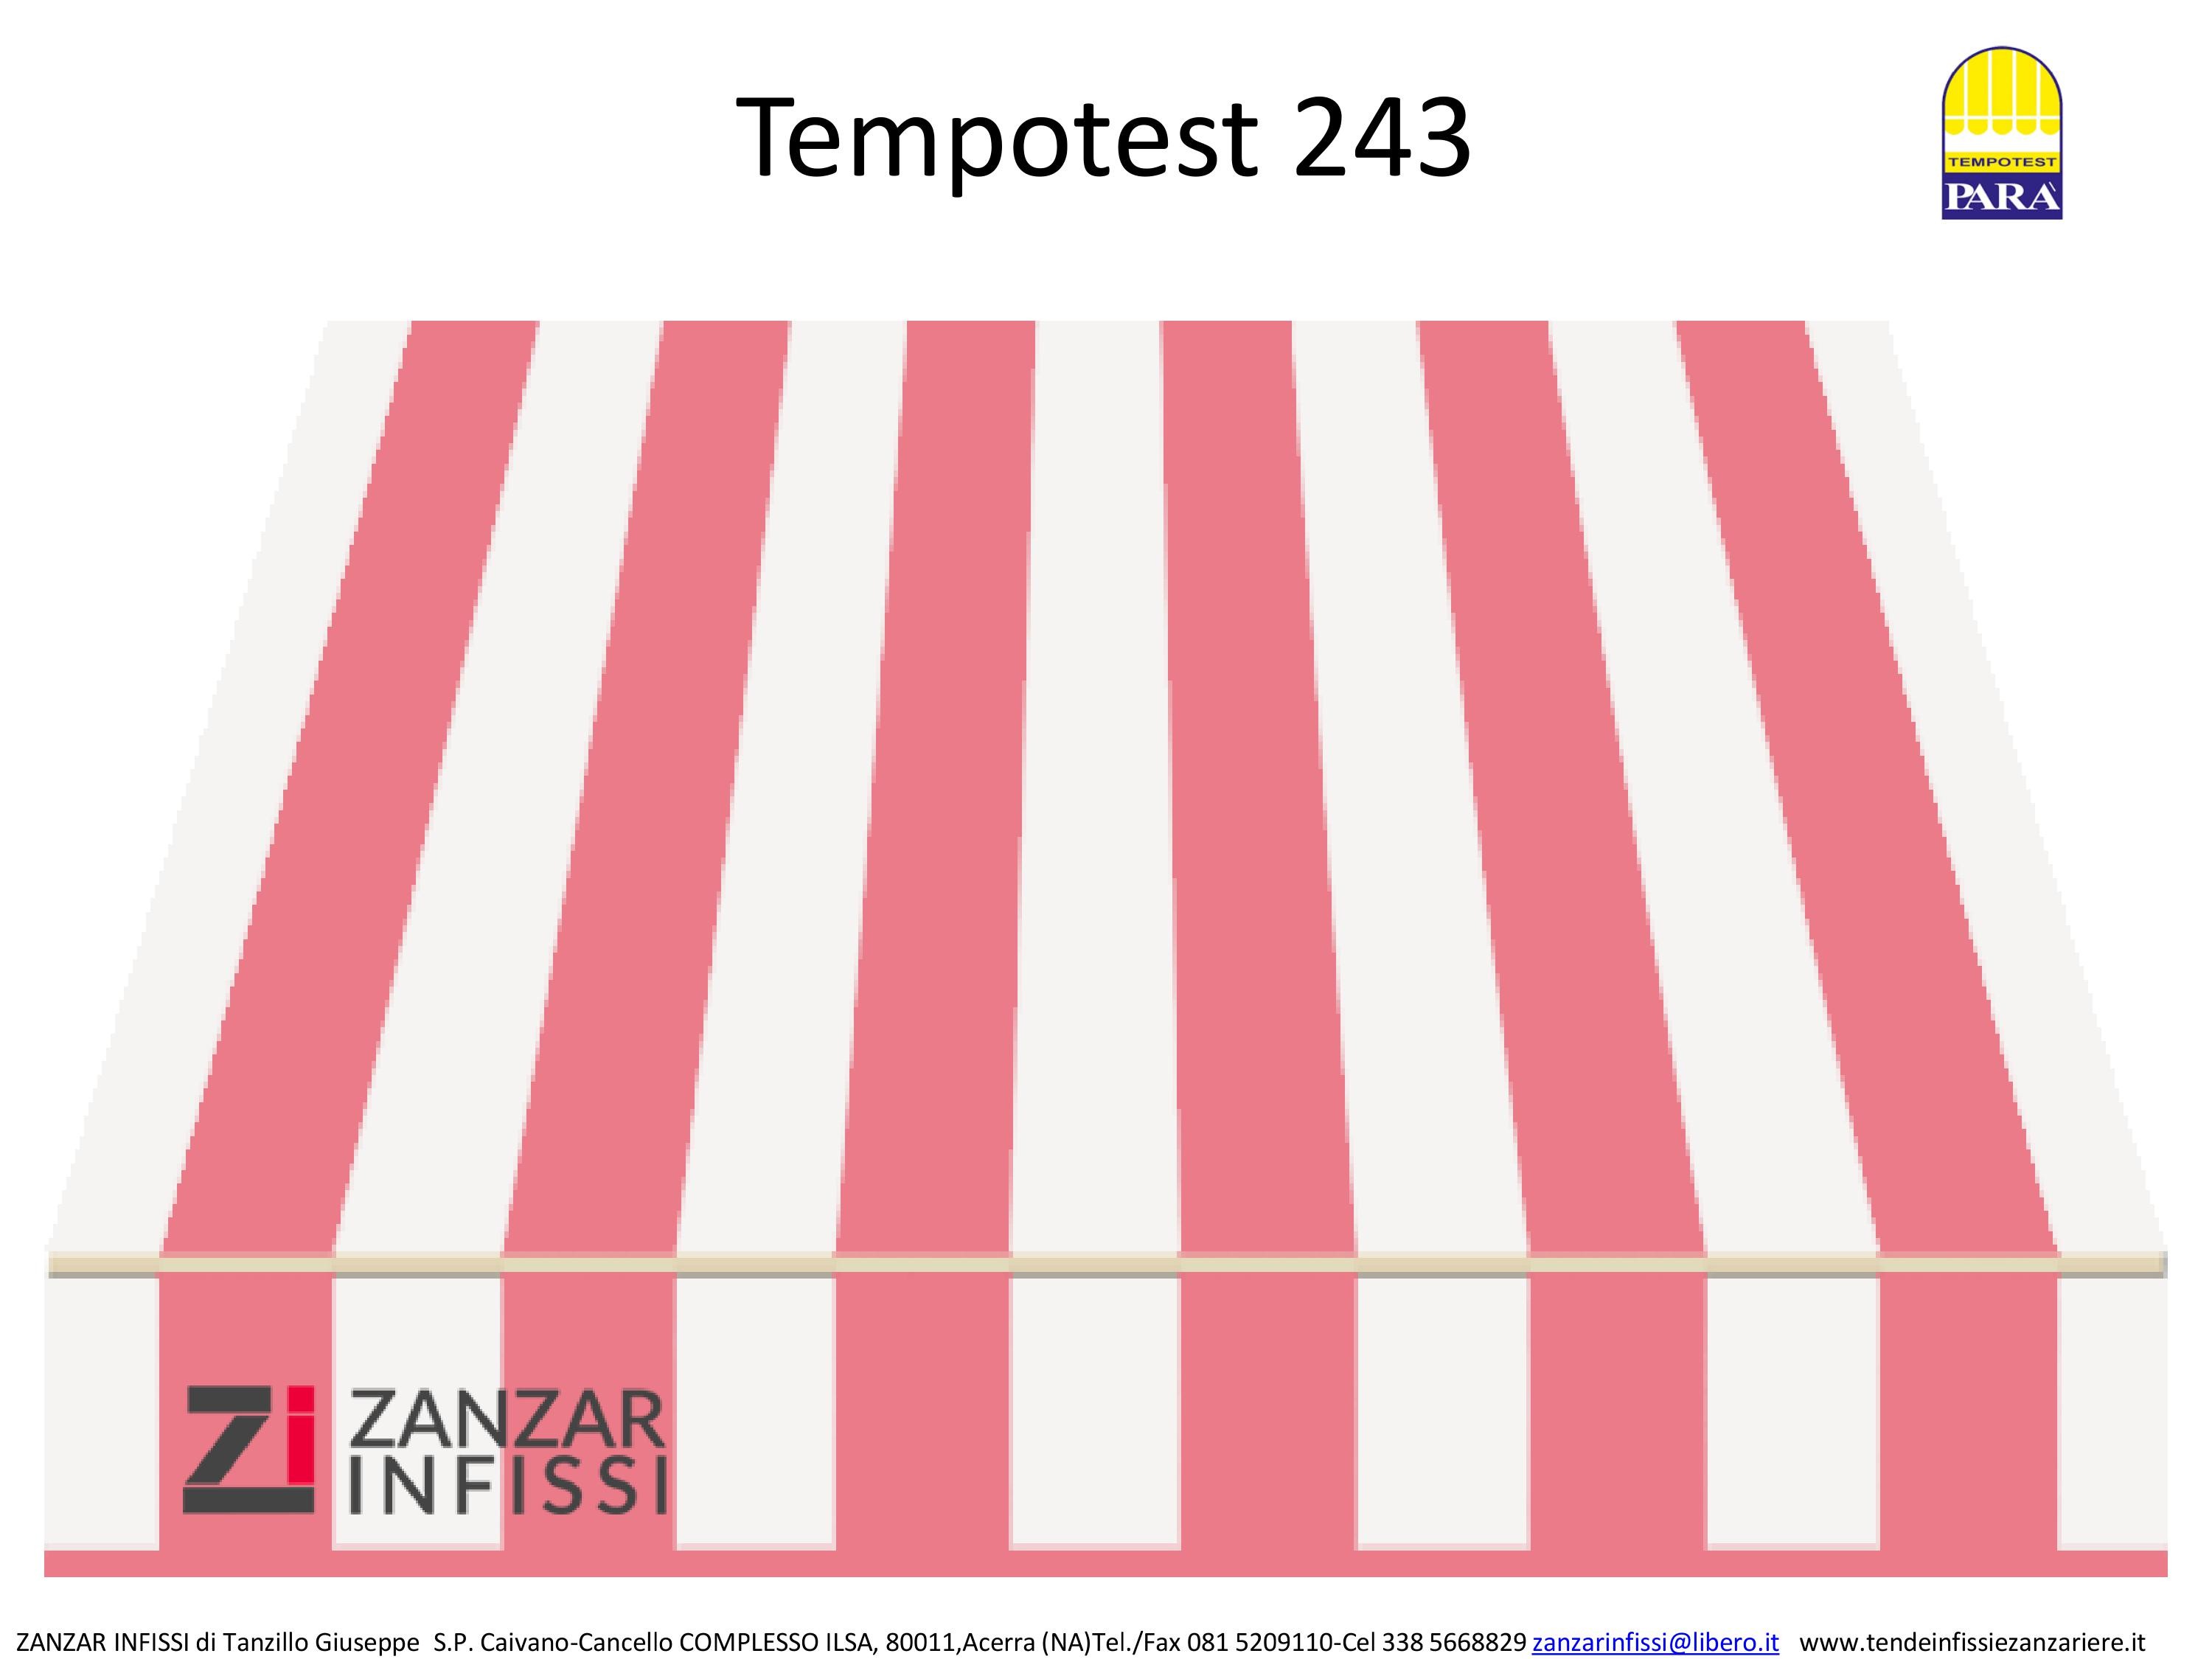 Tempotest 243